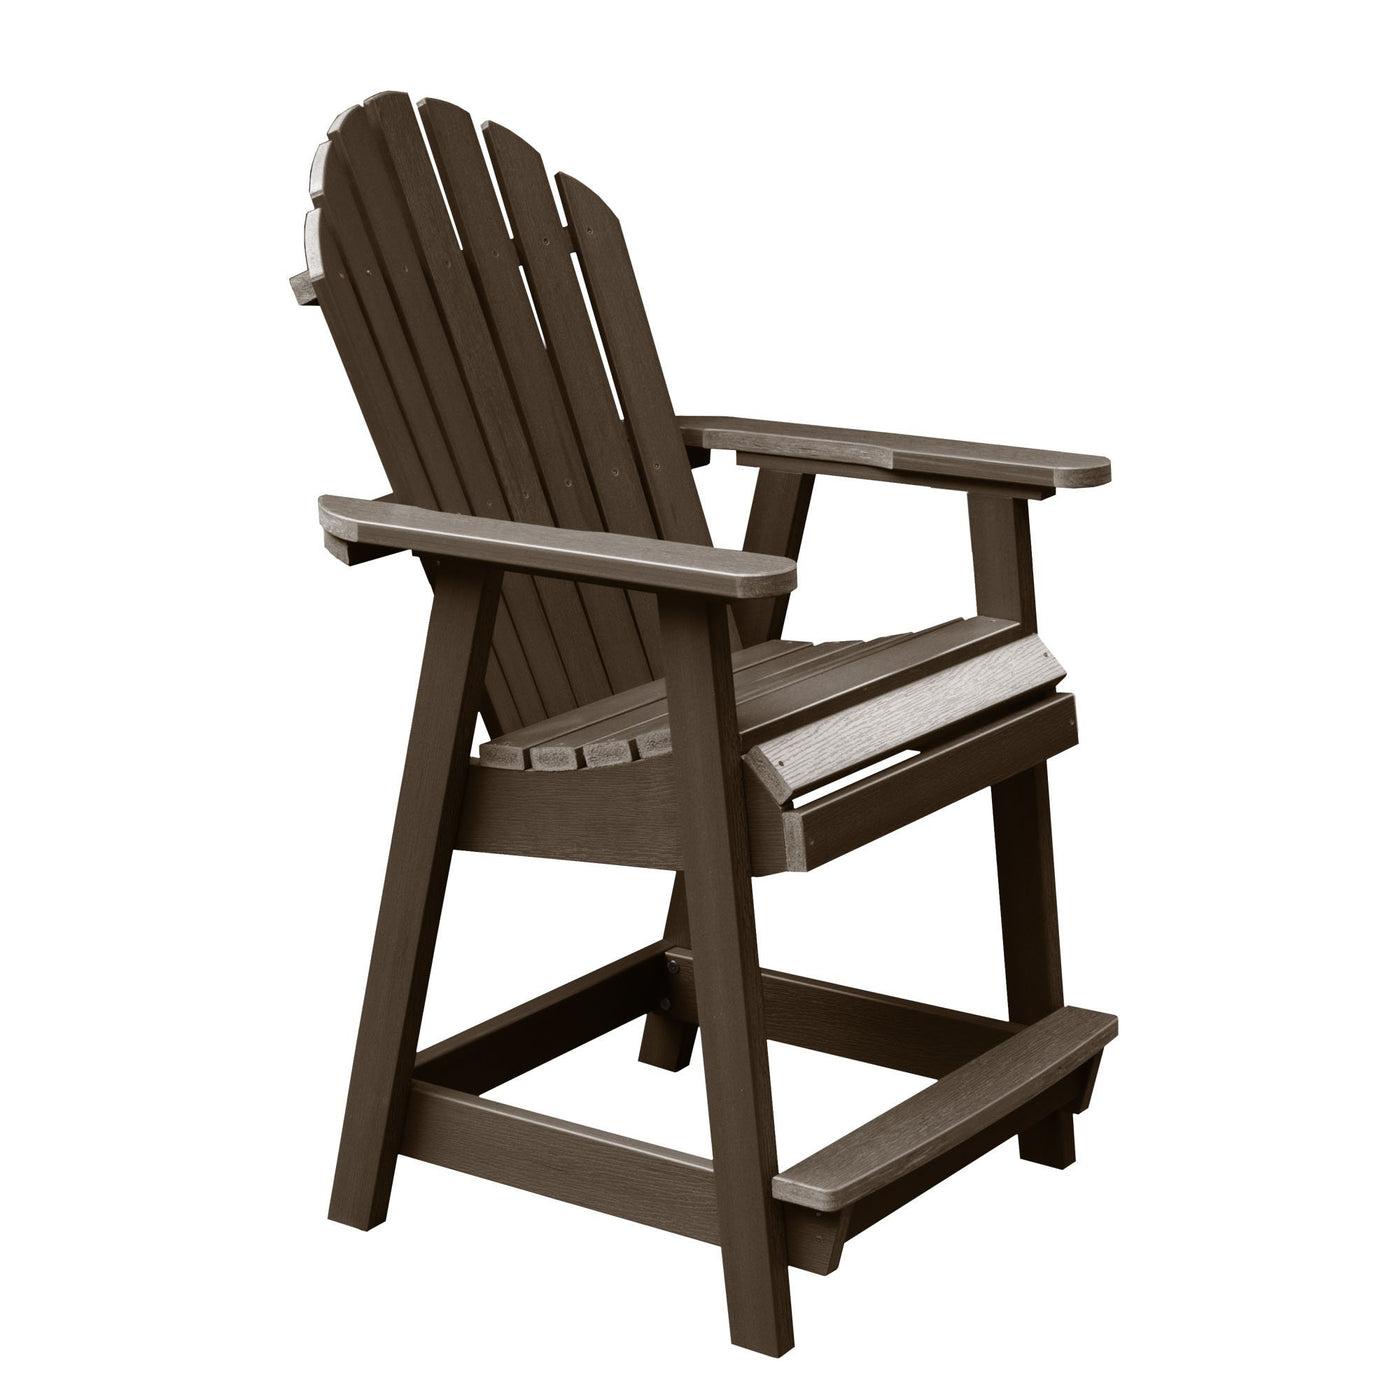 Hamilton Deck Chair in Counter Height Dining Highwood USA Weathered Acorn 